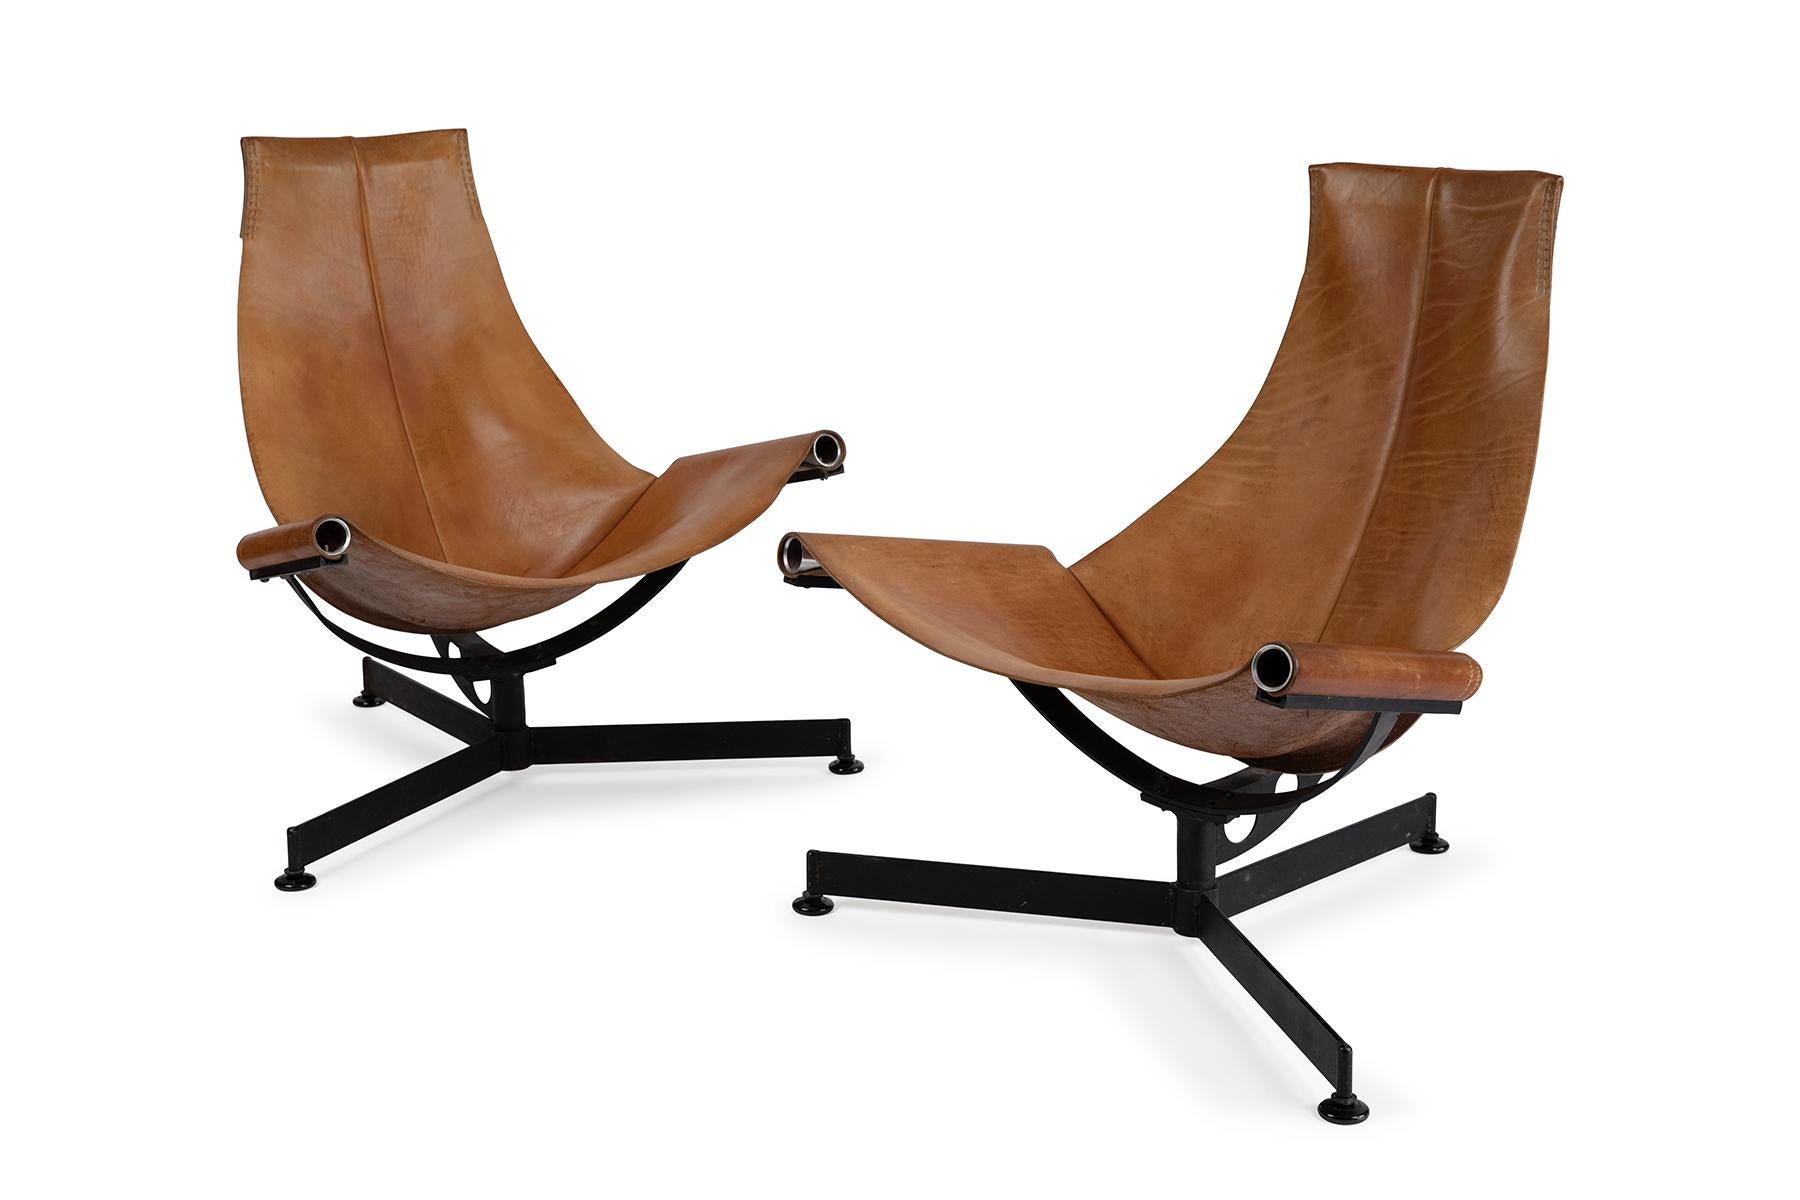 Early 1970s patinated saddle leather sling chairs with graceful iron frames by Tucson, Arizona designer Max Gottschalk. These all original examples are priced as a pair.